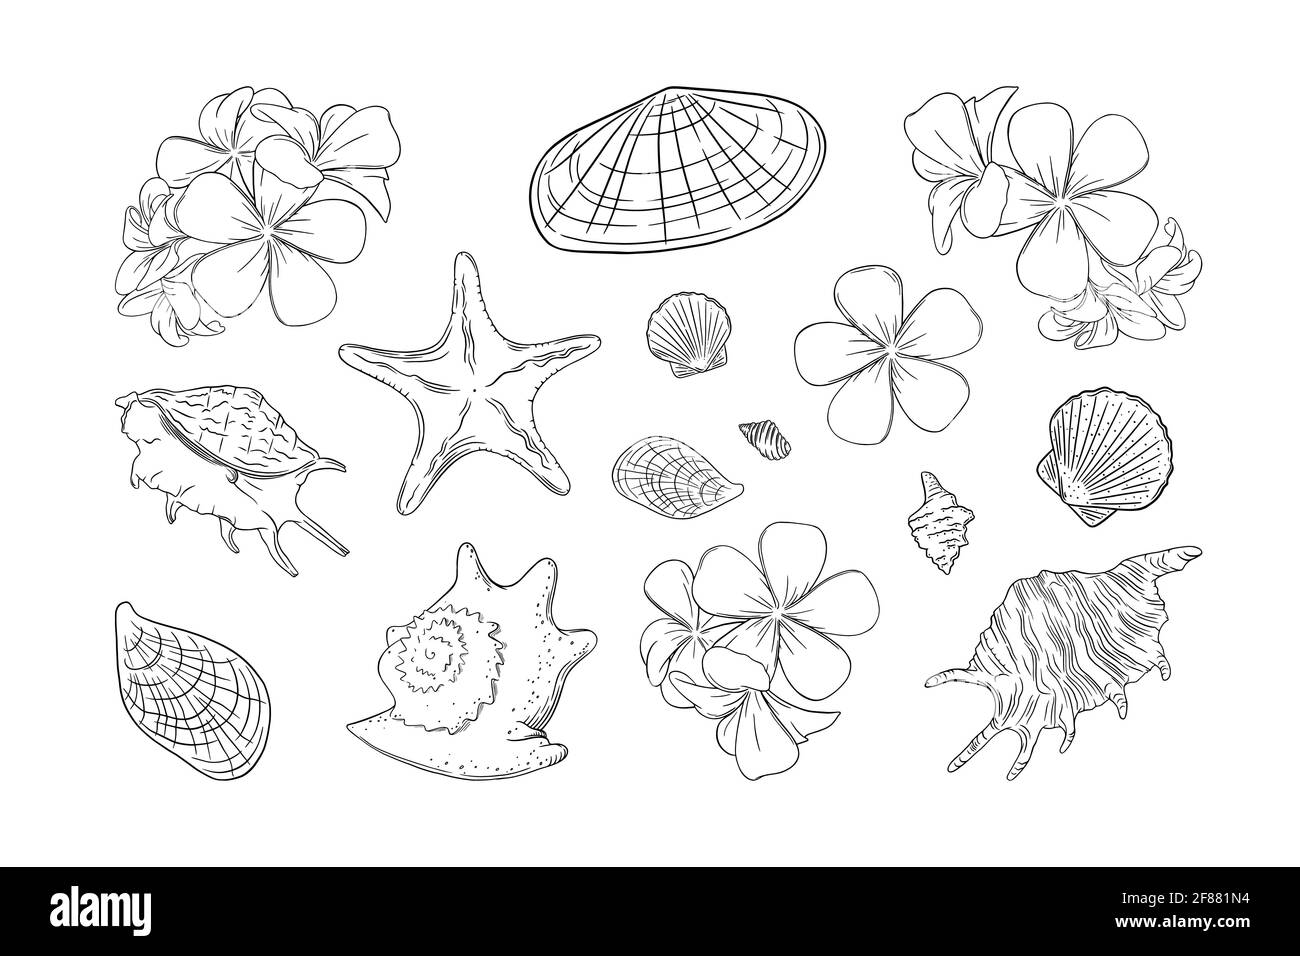 Seashells and frangipani set. Shells and plumera flowers isolated in white background. Sketch ector illustration Stock Vector